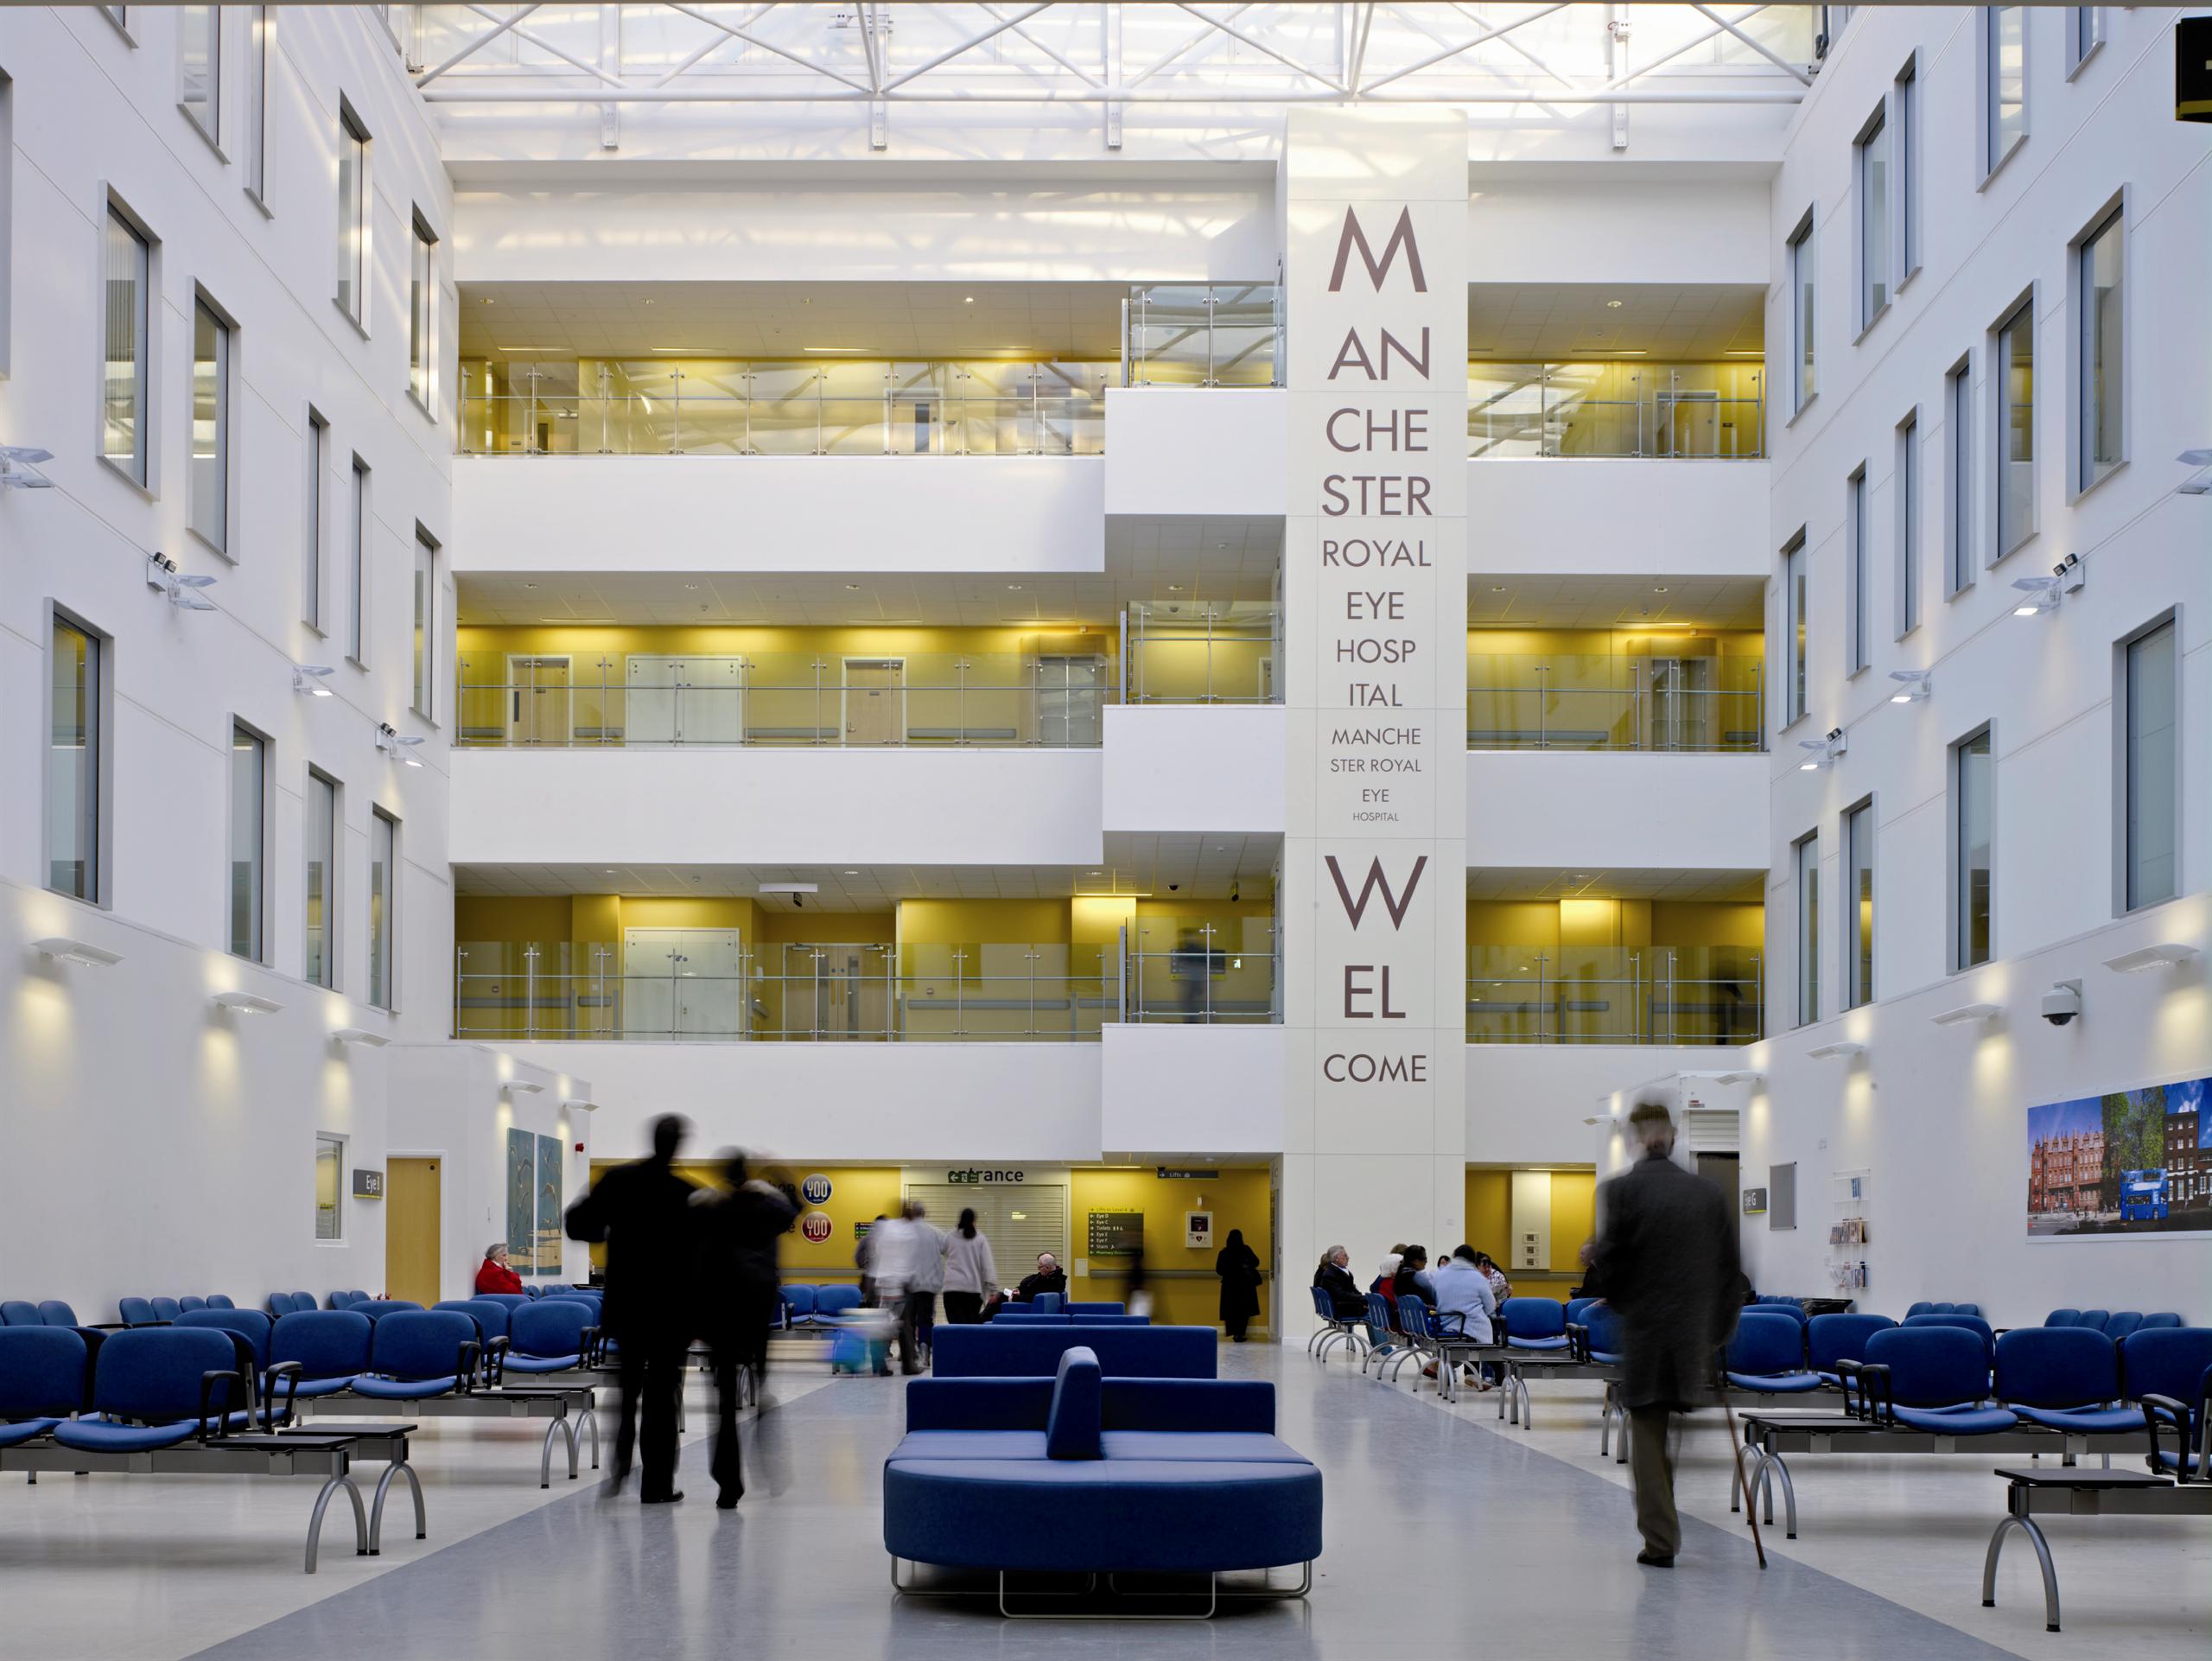 Inner view of the ground floor at Manchester Hospital